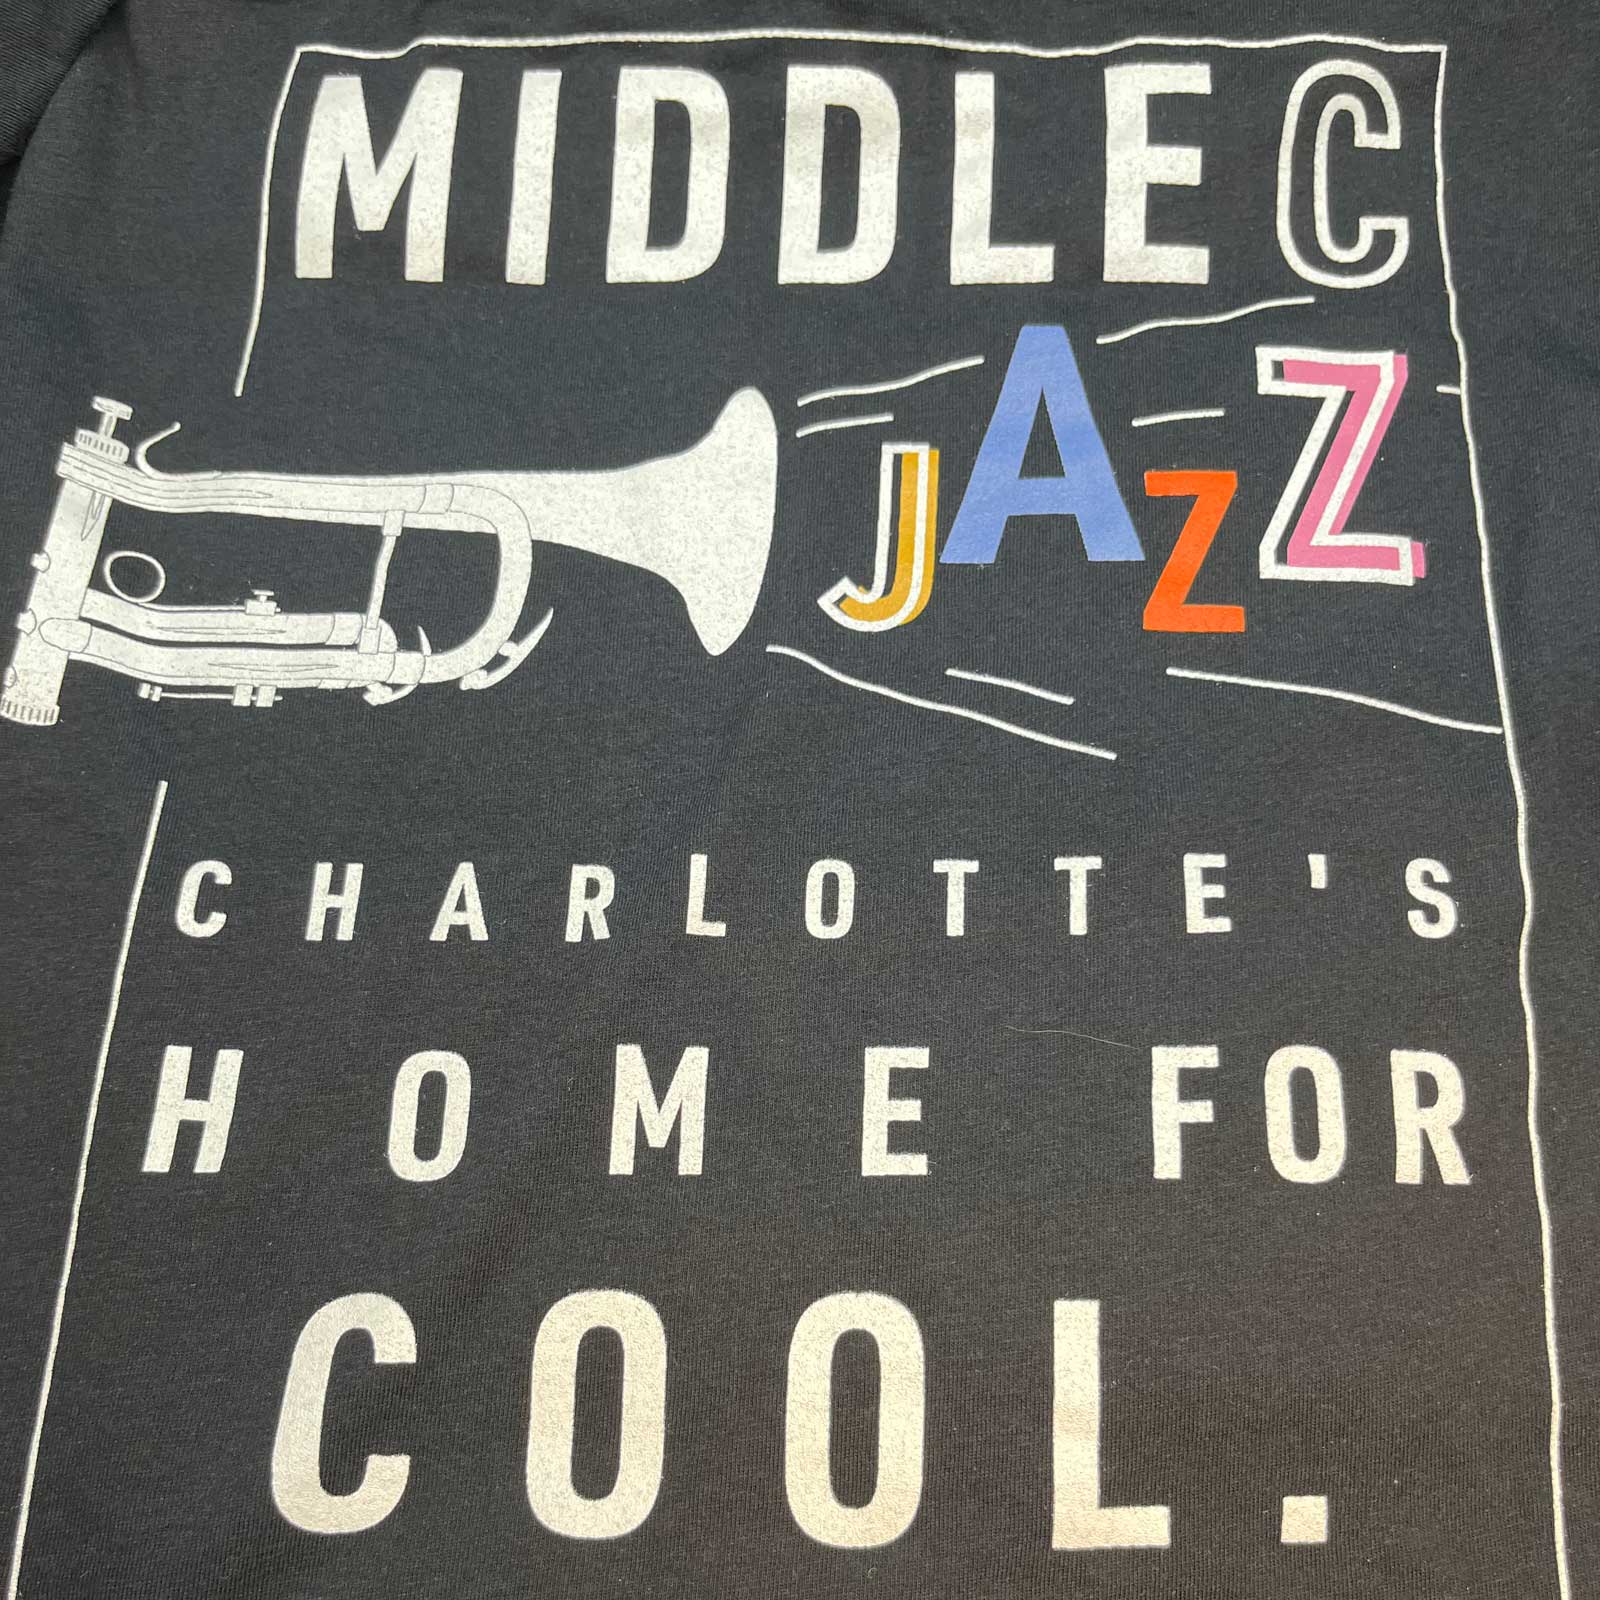 Middle C Jazz Gift Cards